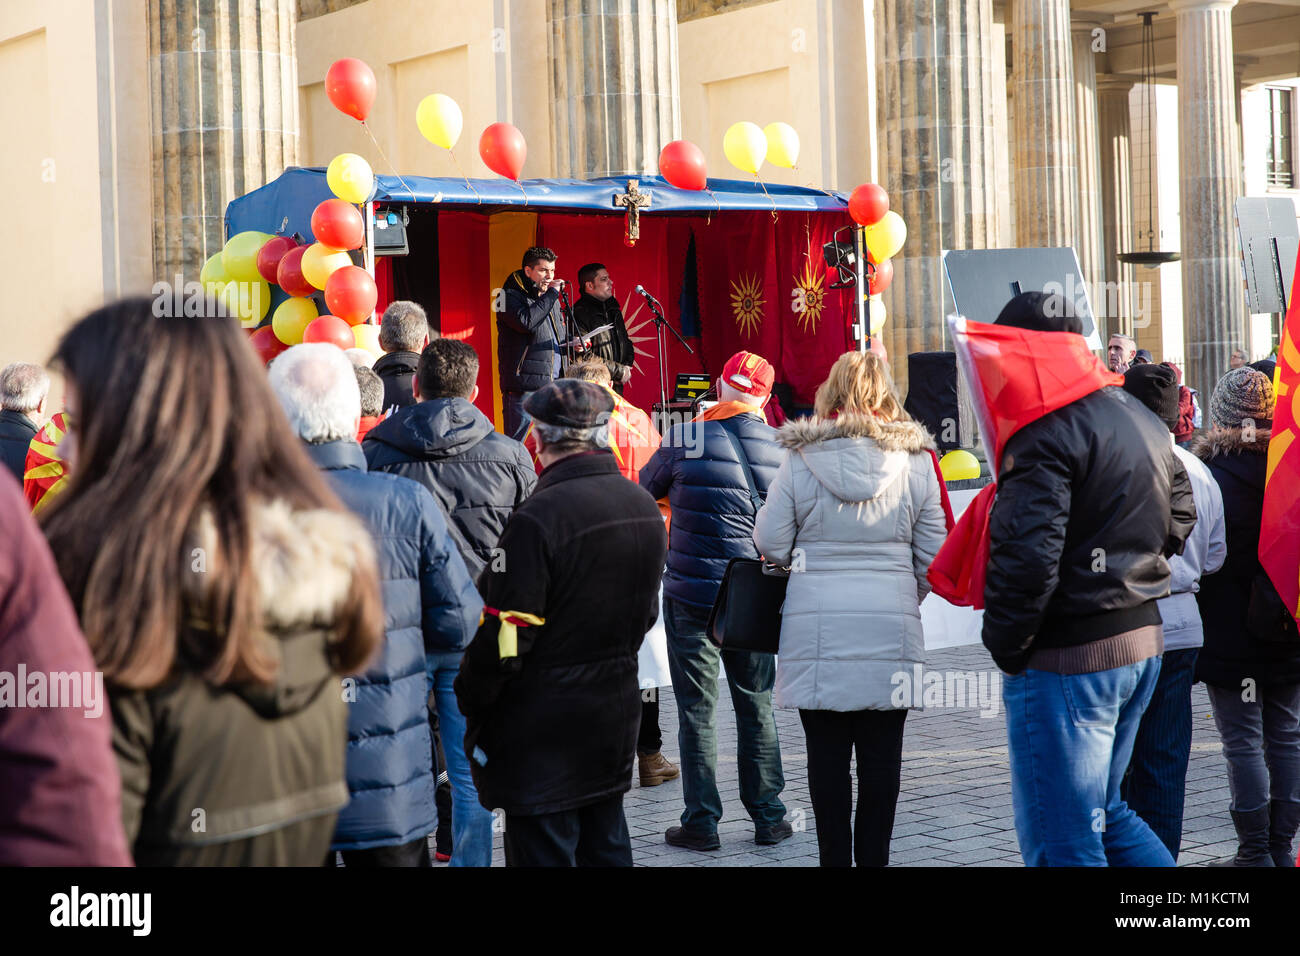 Macedonians living in Berlin staging a peaceful protest to demonstrate disapproval of Macedonian government policies and calling for nation unity Stock Photo